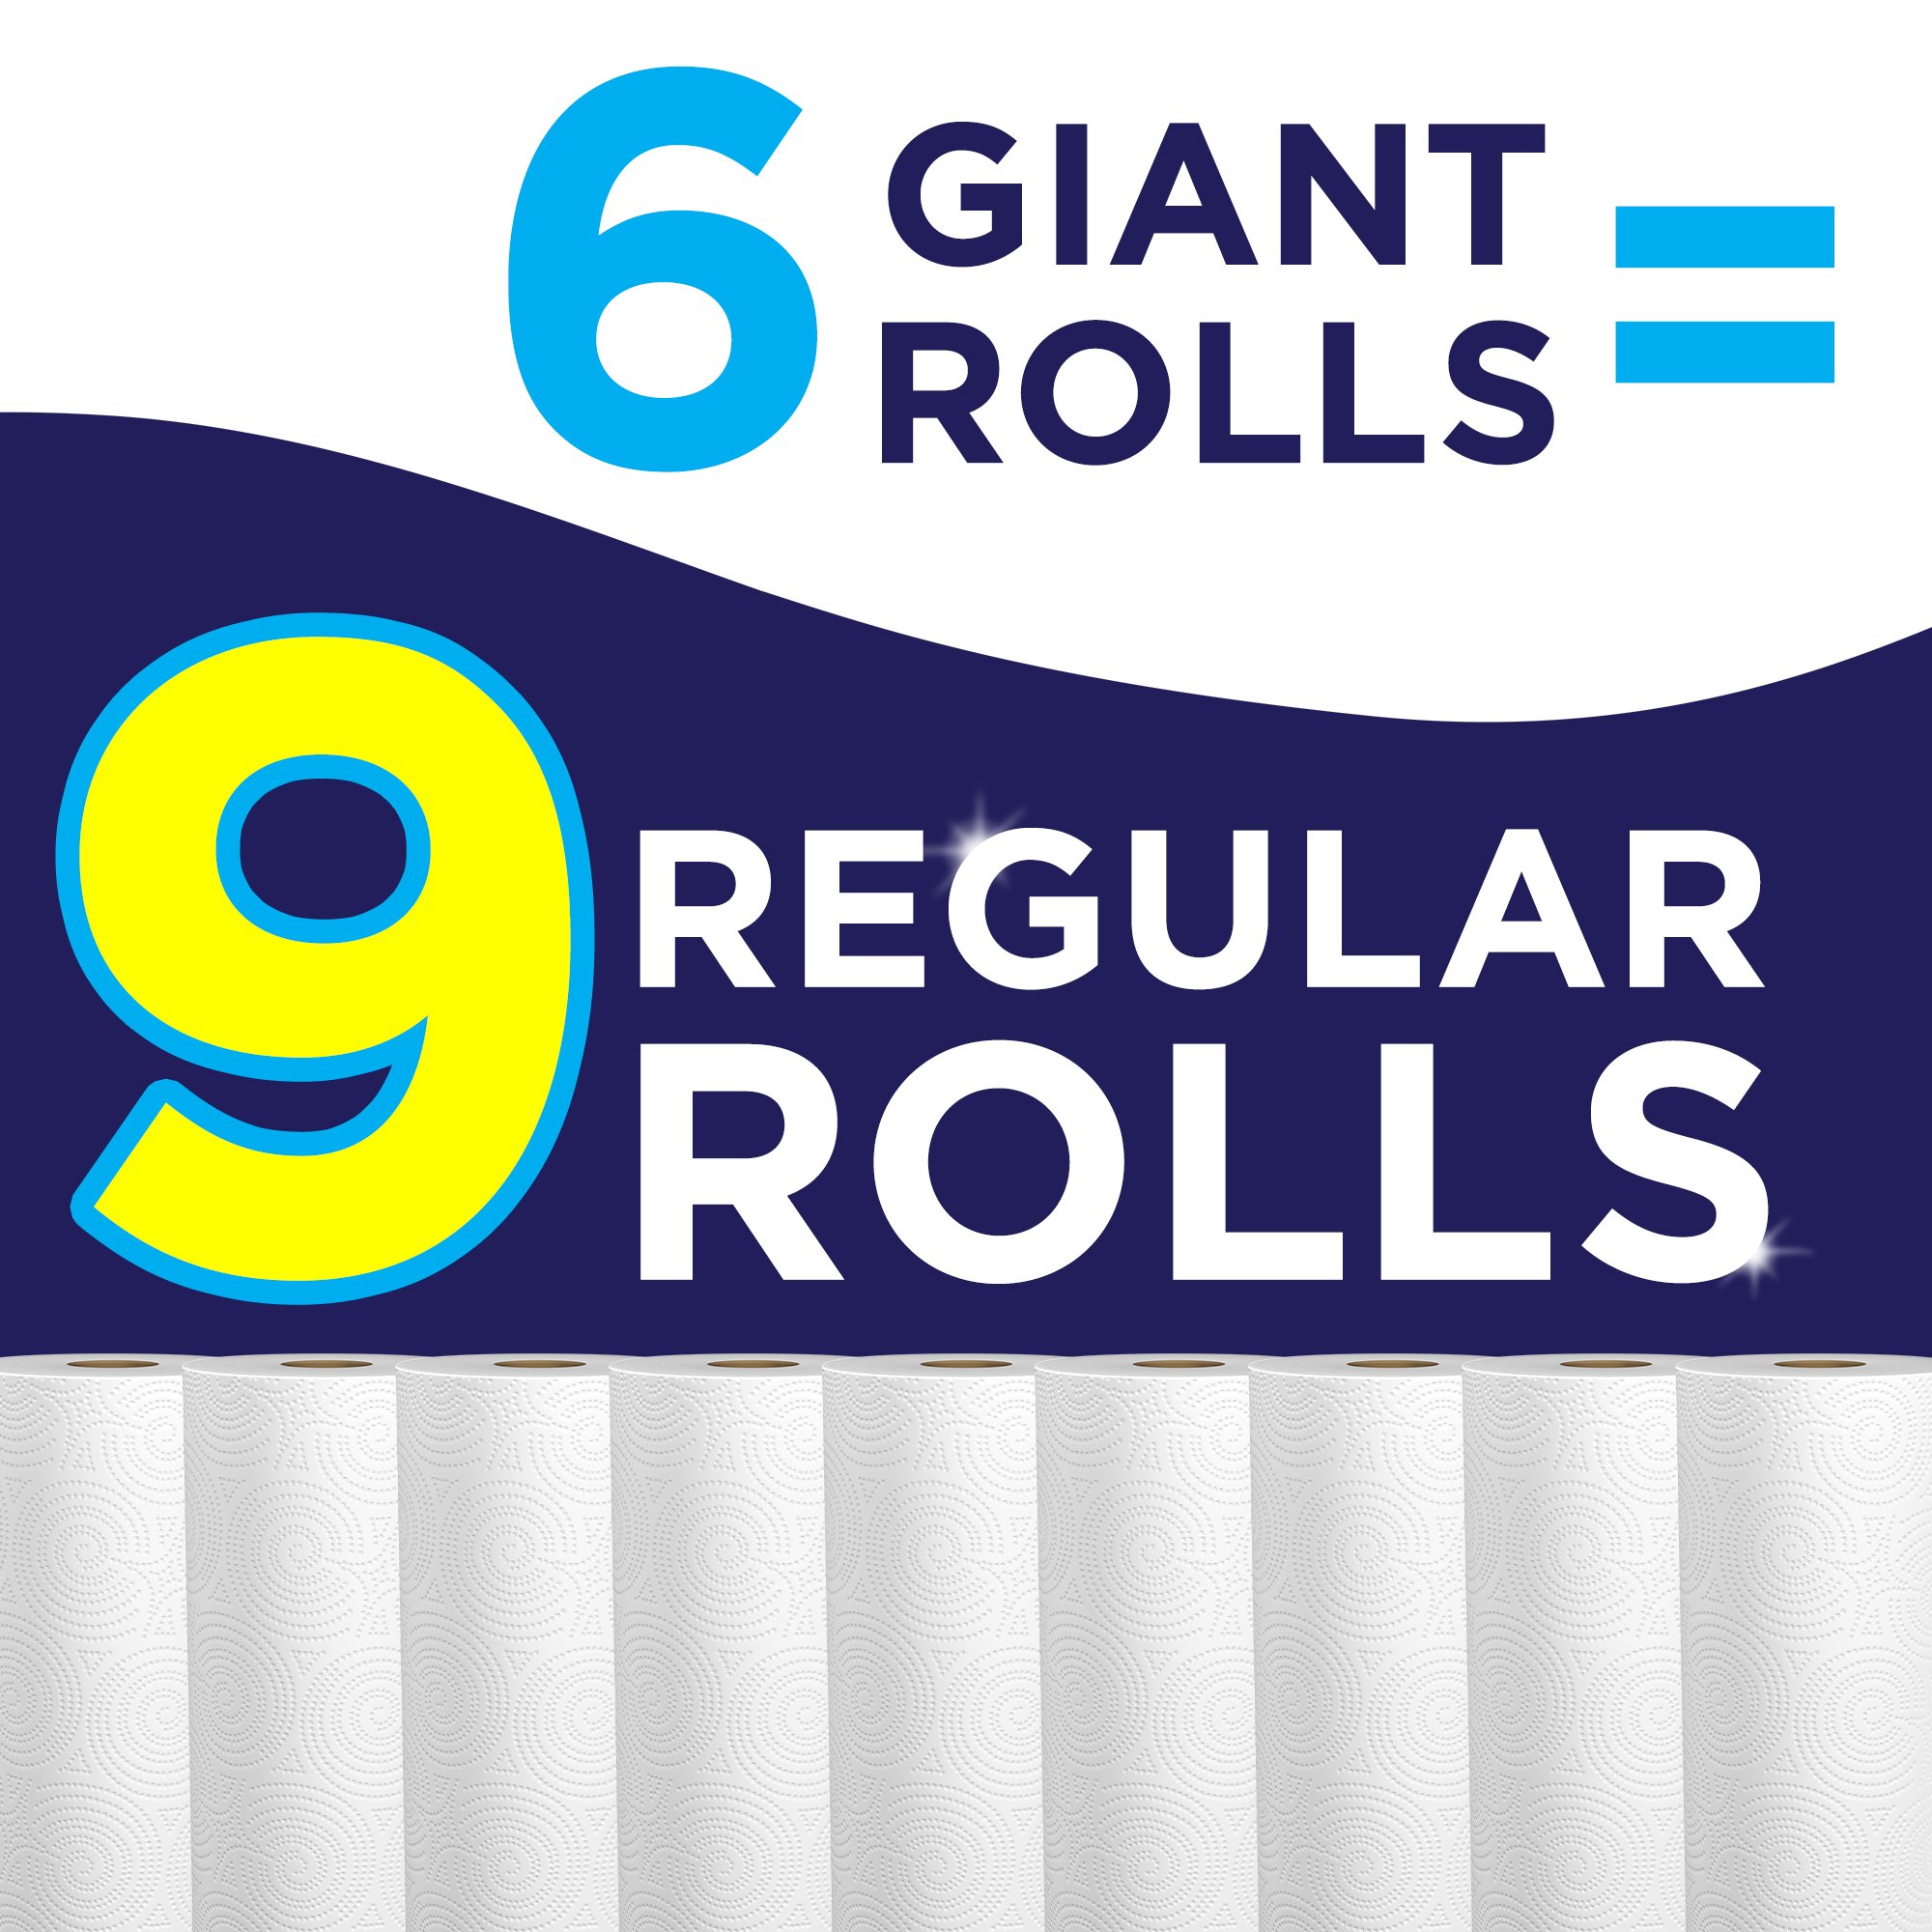 Sparkle Paper Towels, 6 Giant Rolls = 9 Regular Rolls, Pick-A-Size, White, 90 Sheets Per Roll